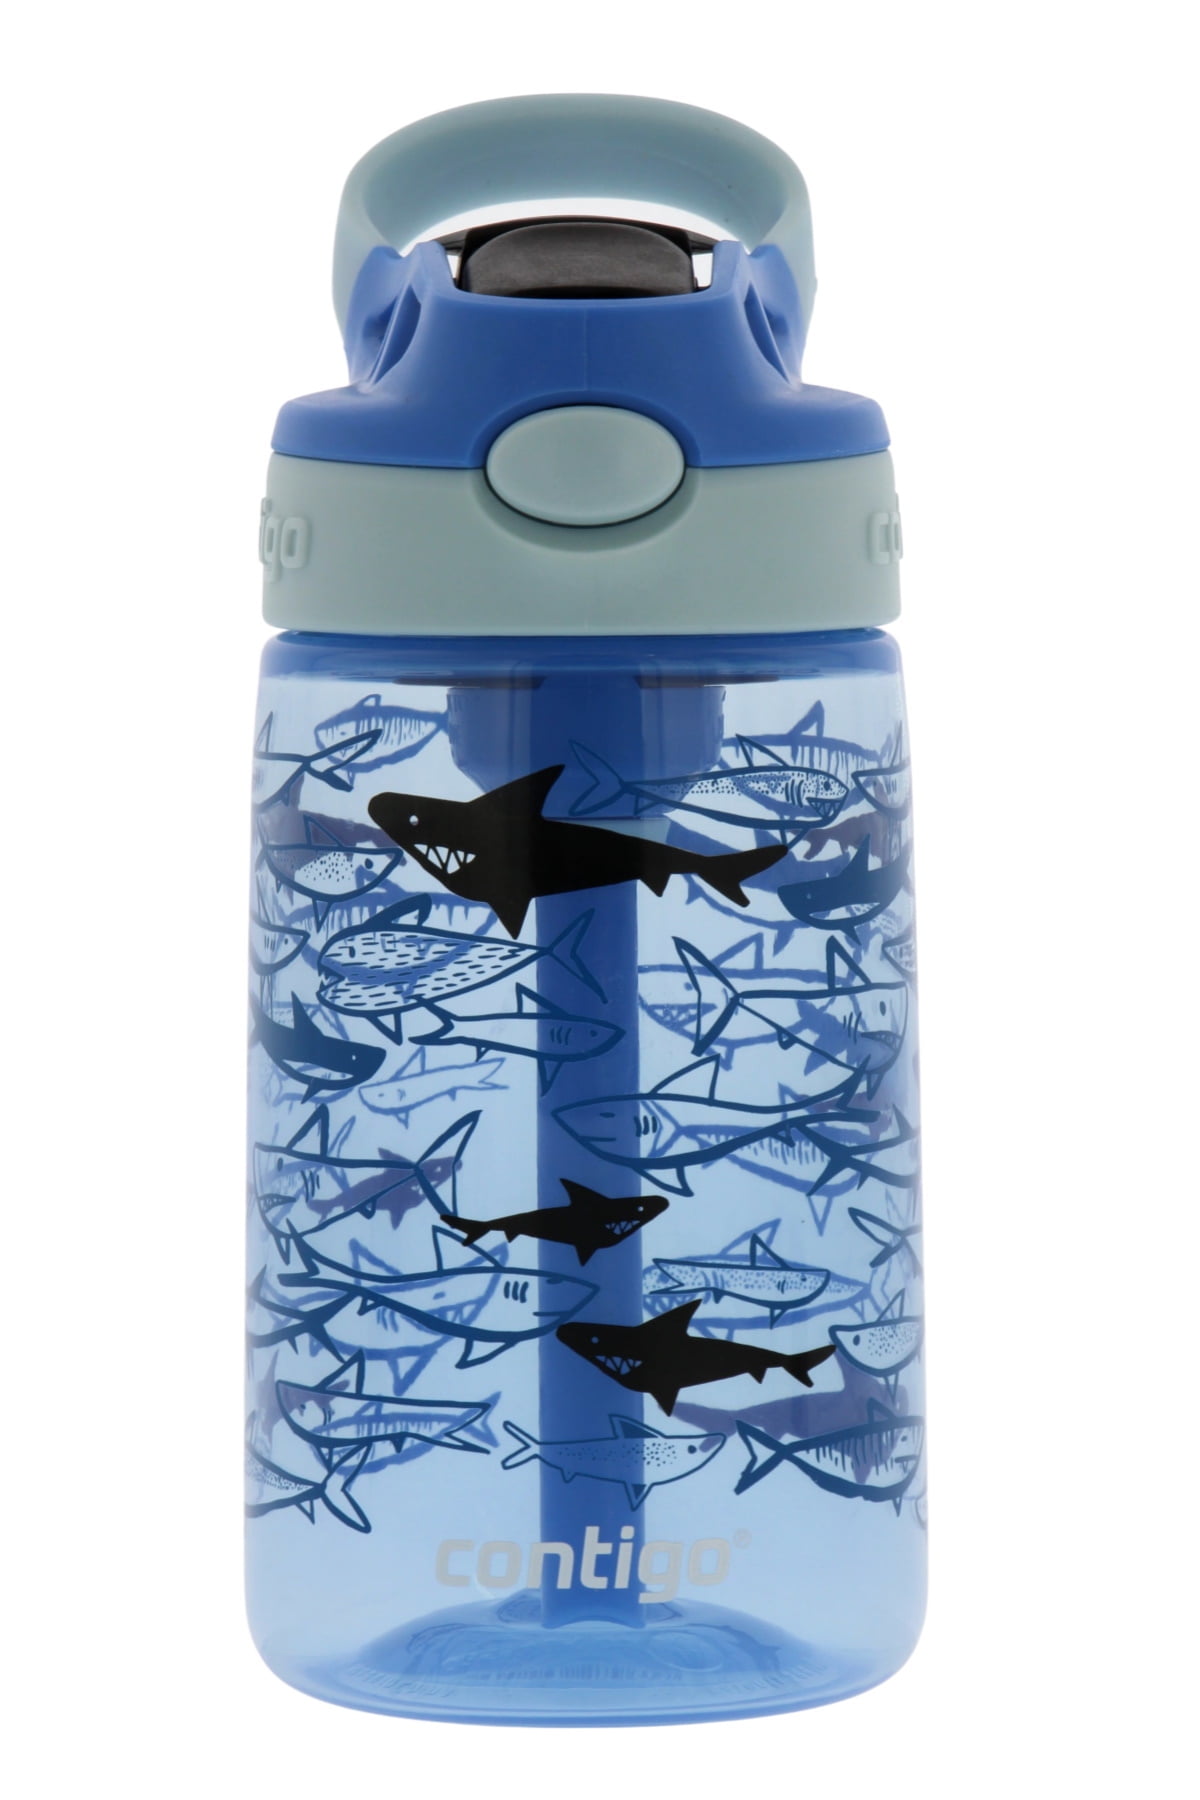 Contigo Aubrey Kids Cleanable Water Bottle with Silicone Straw and  Spill-Proof Lid, Dishwasher Safe, 14oz 2-Pack, Dinos & Sharks